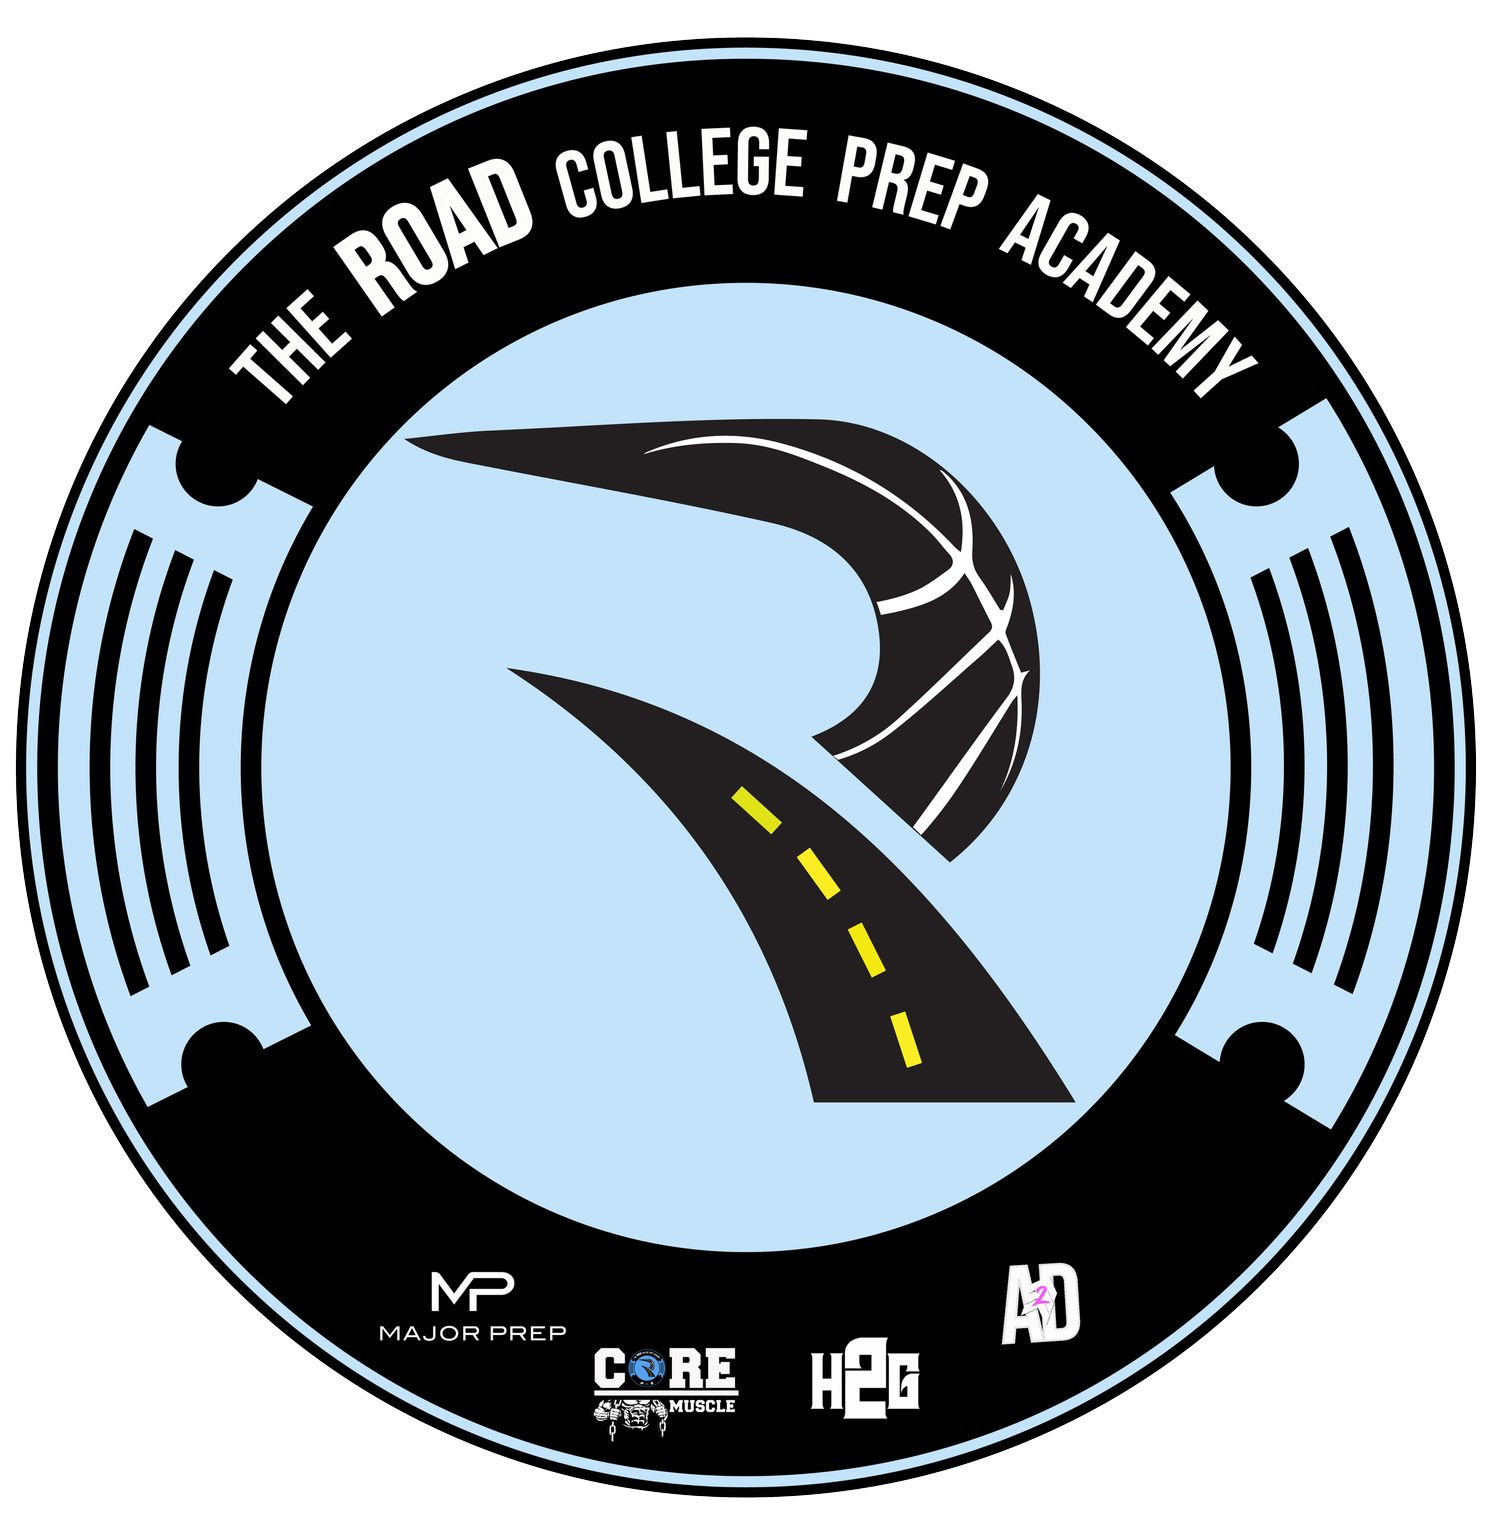 The Road College Prep Academy